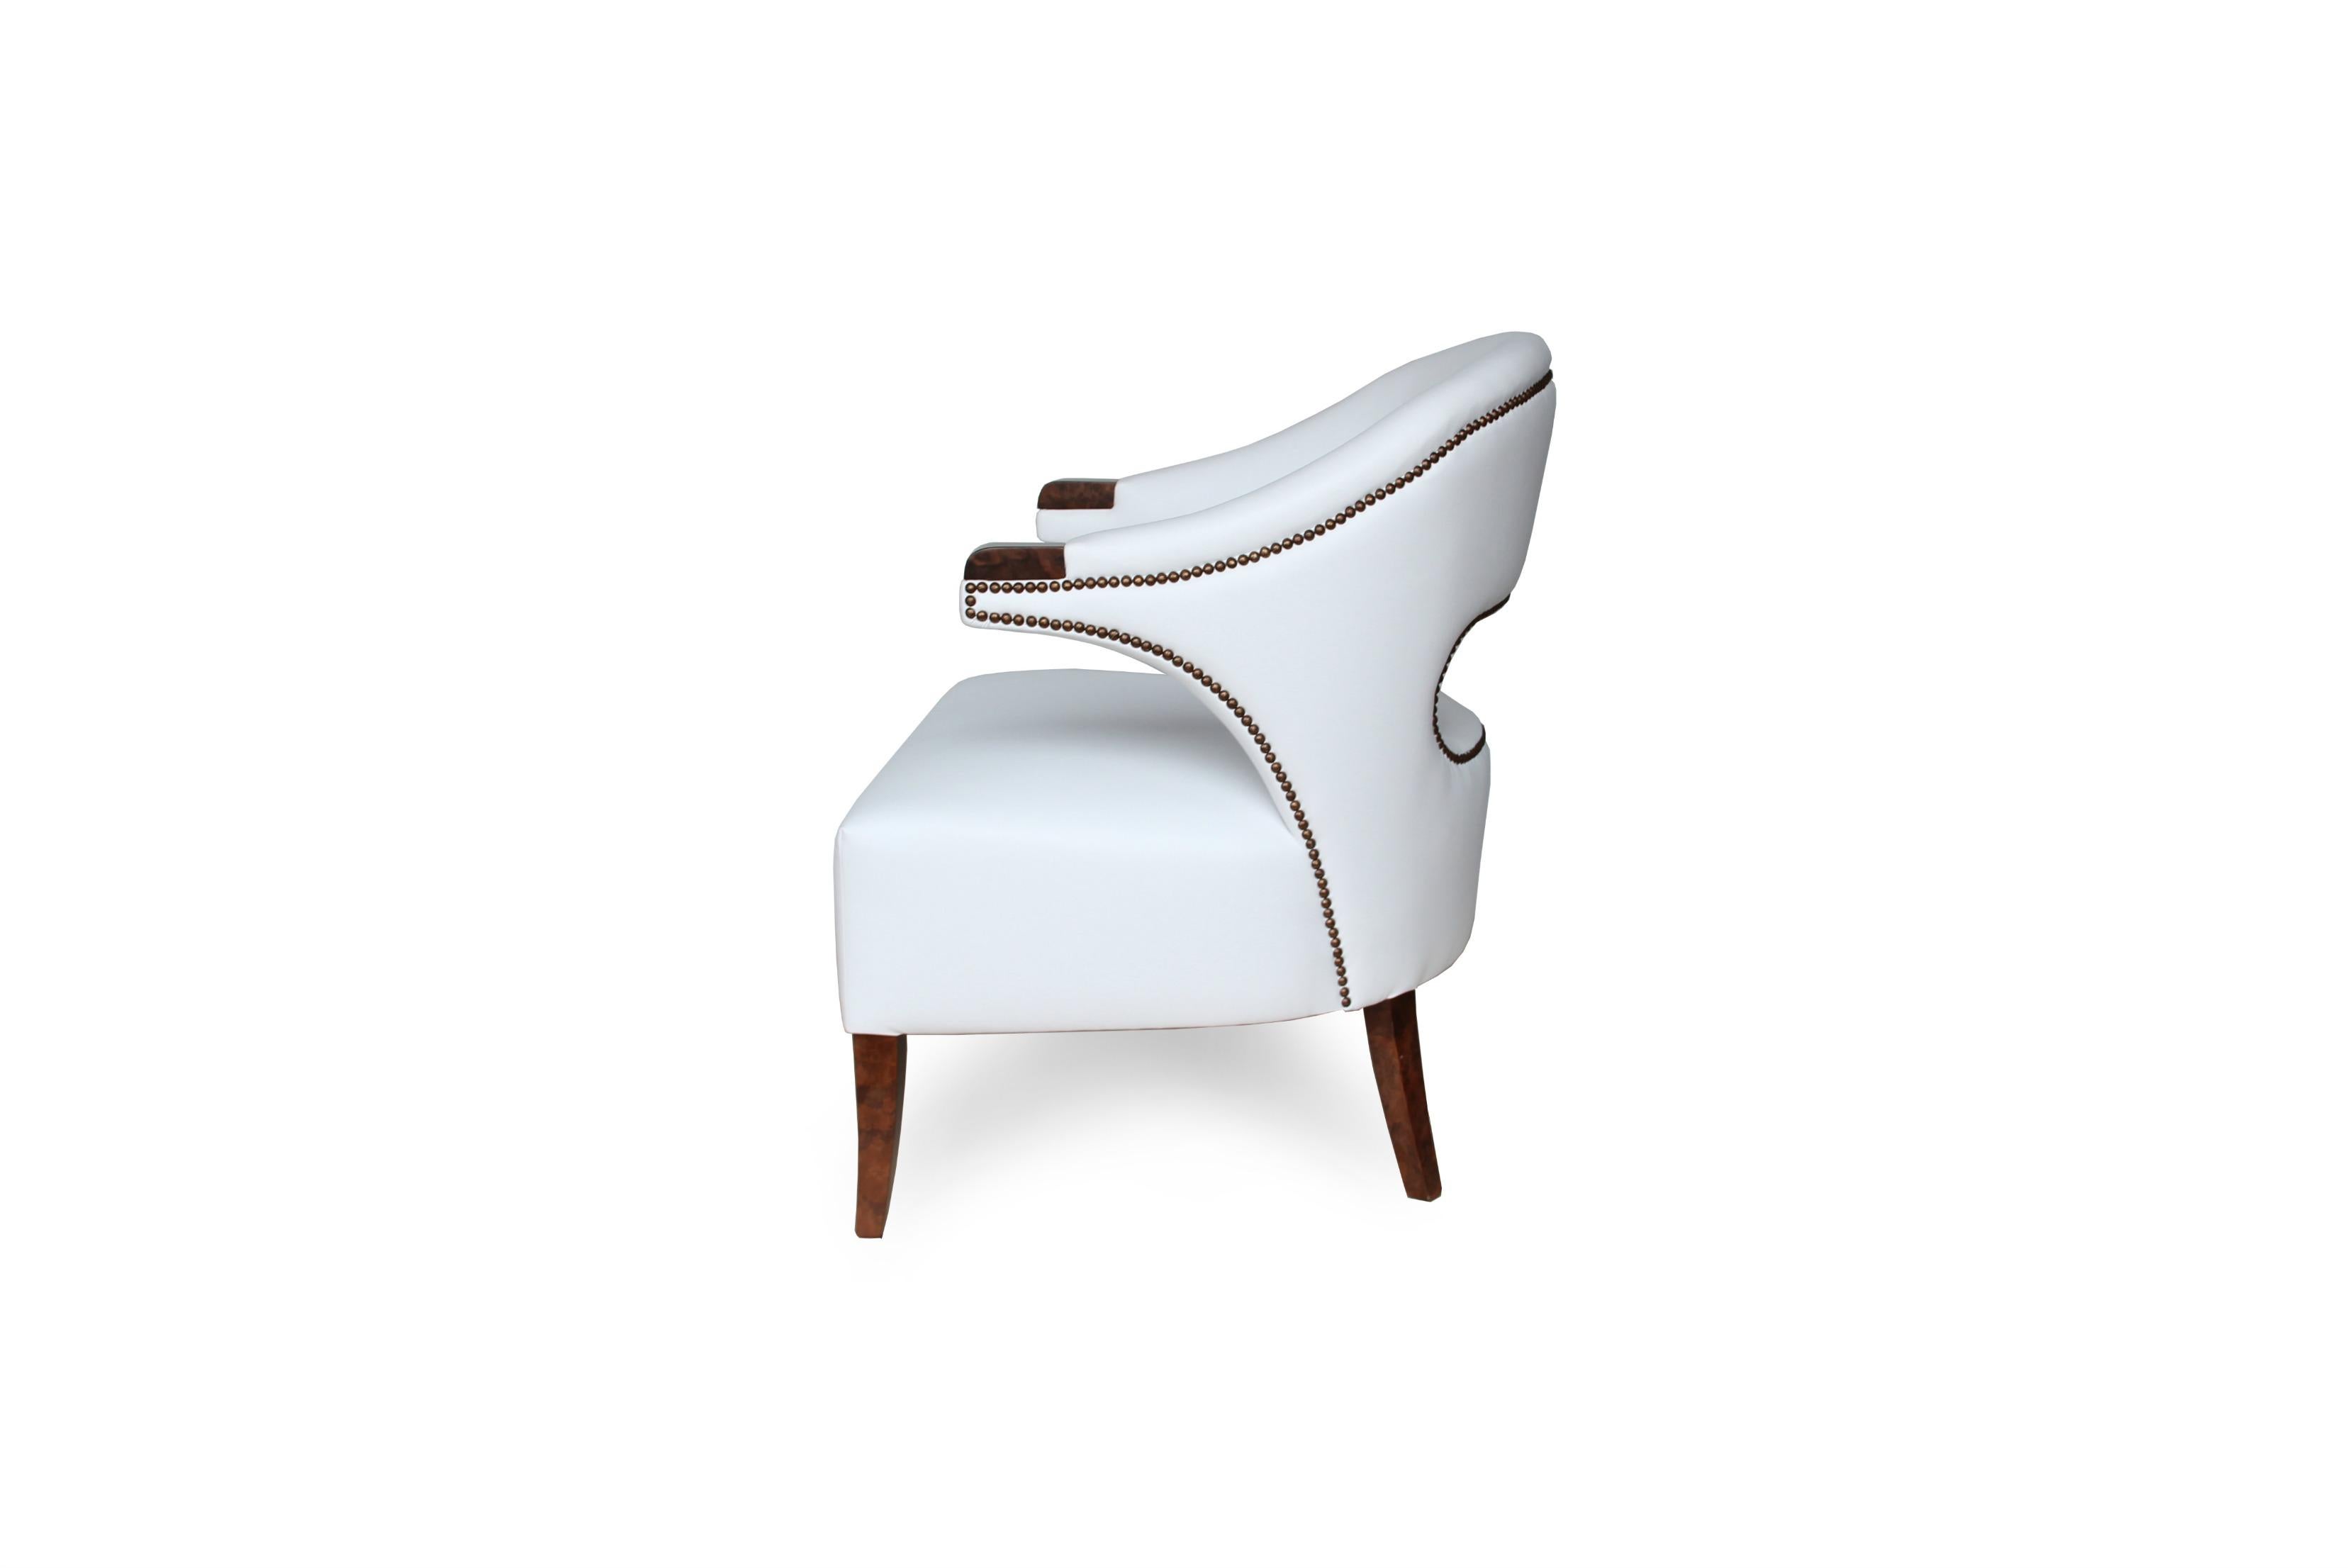 Nanook is the master of bears, the one who decides the luck of the hunters in the Arctic regions. NANOOK Armchair blends the beauty and grandiosity of this animal. This accent chair has a strong presence balanced with the elegance given by the